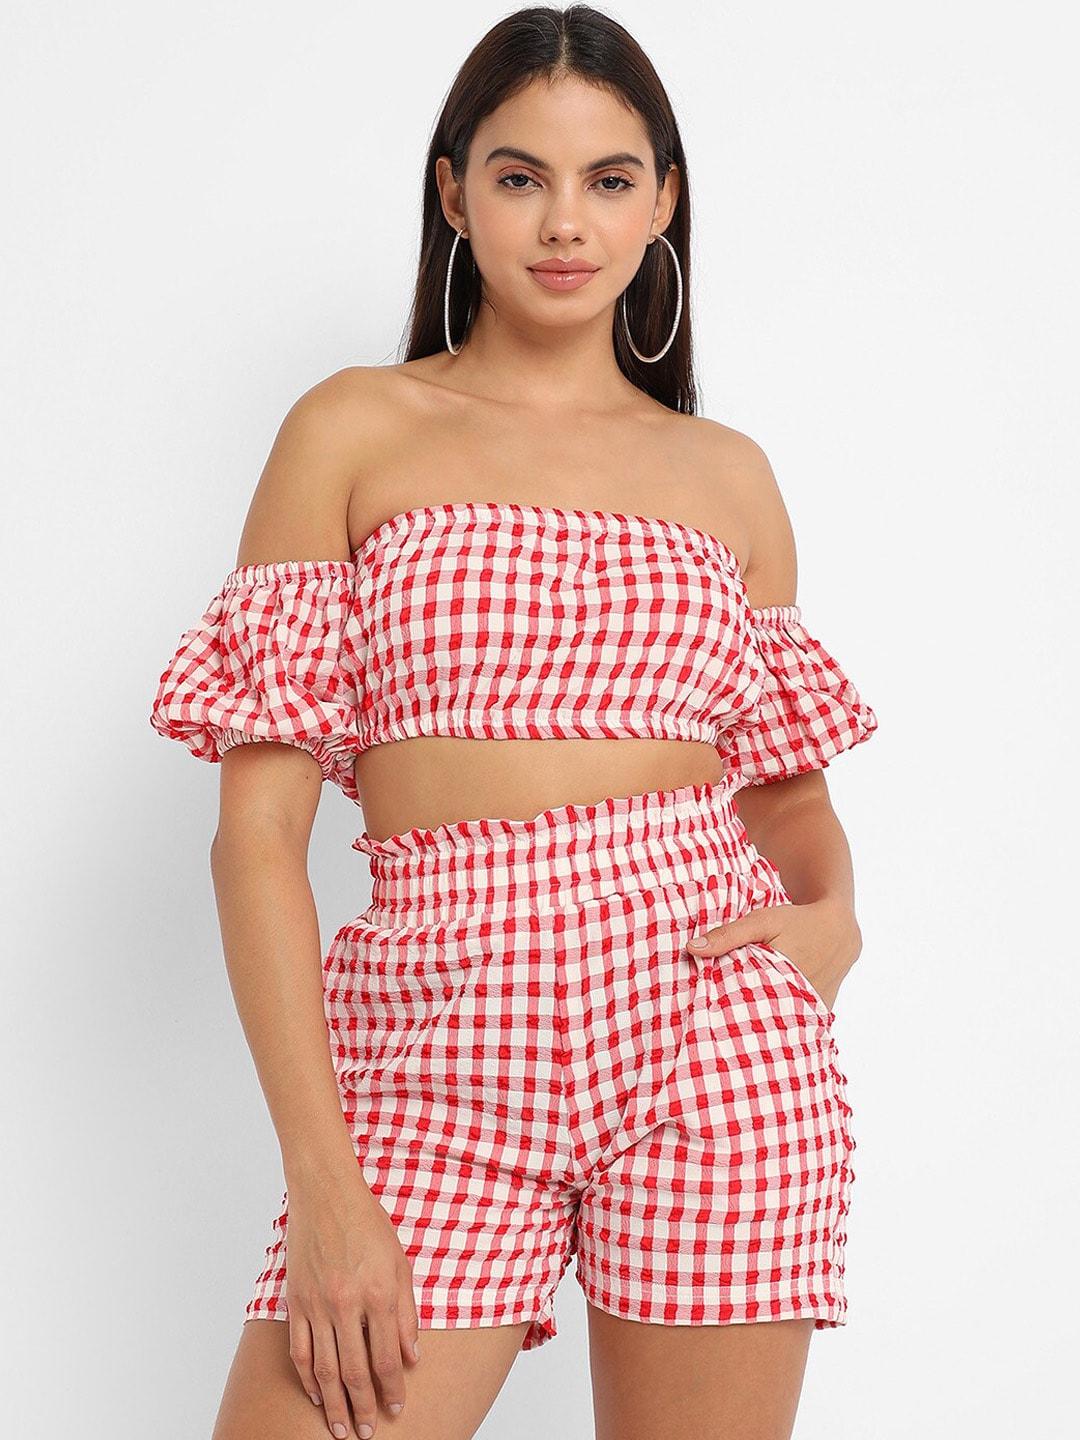 campus sutra gingham checked co-ords set